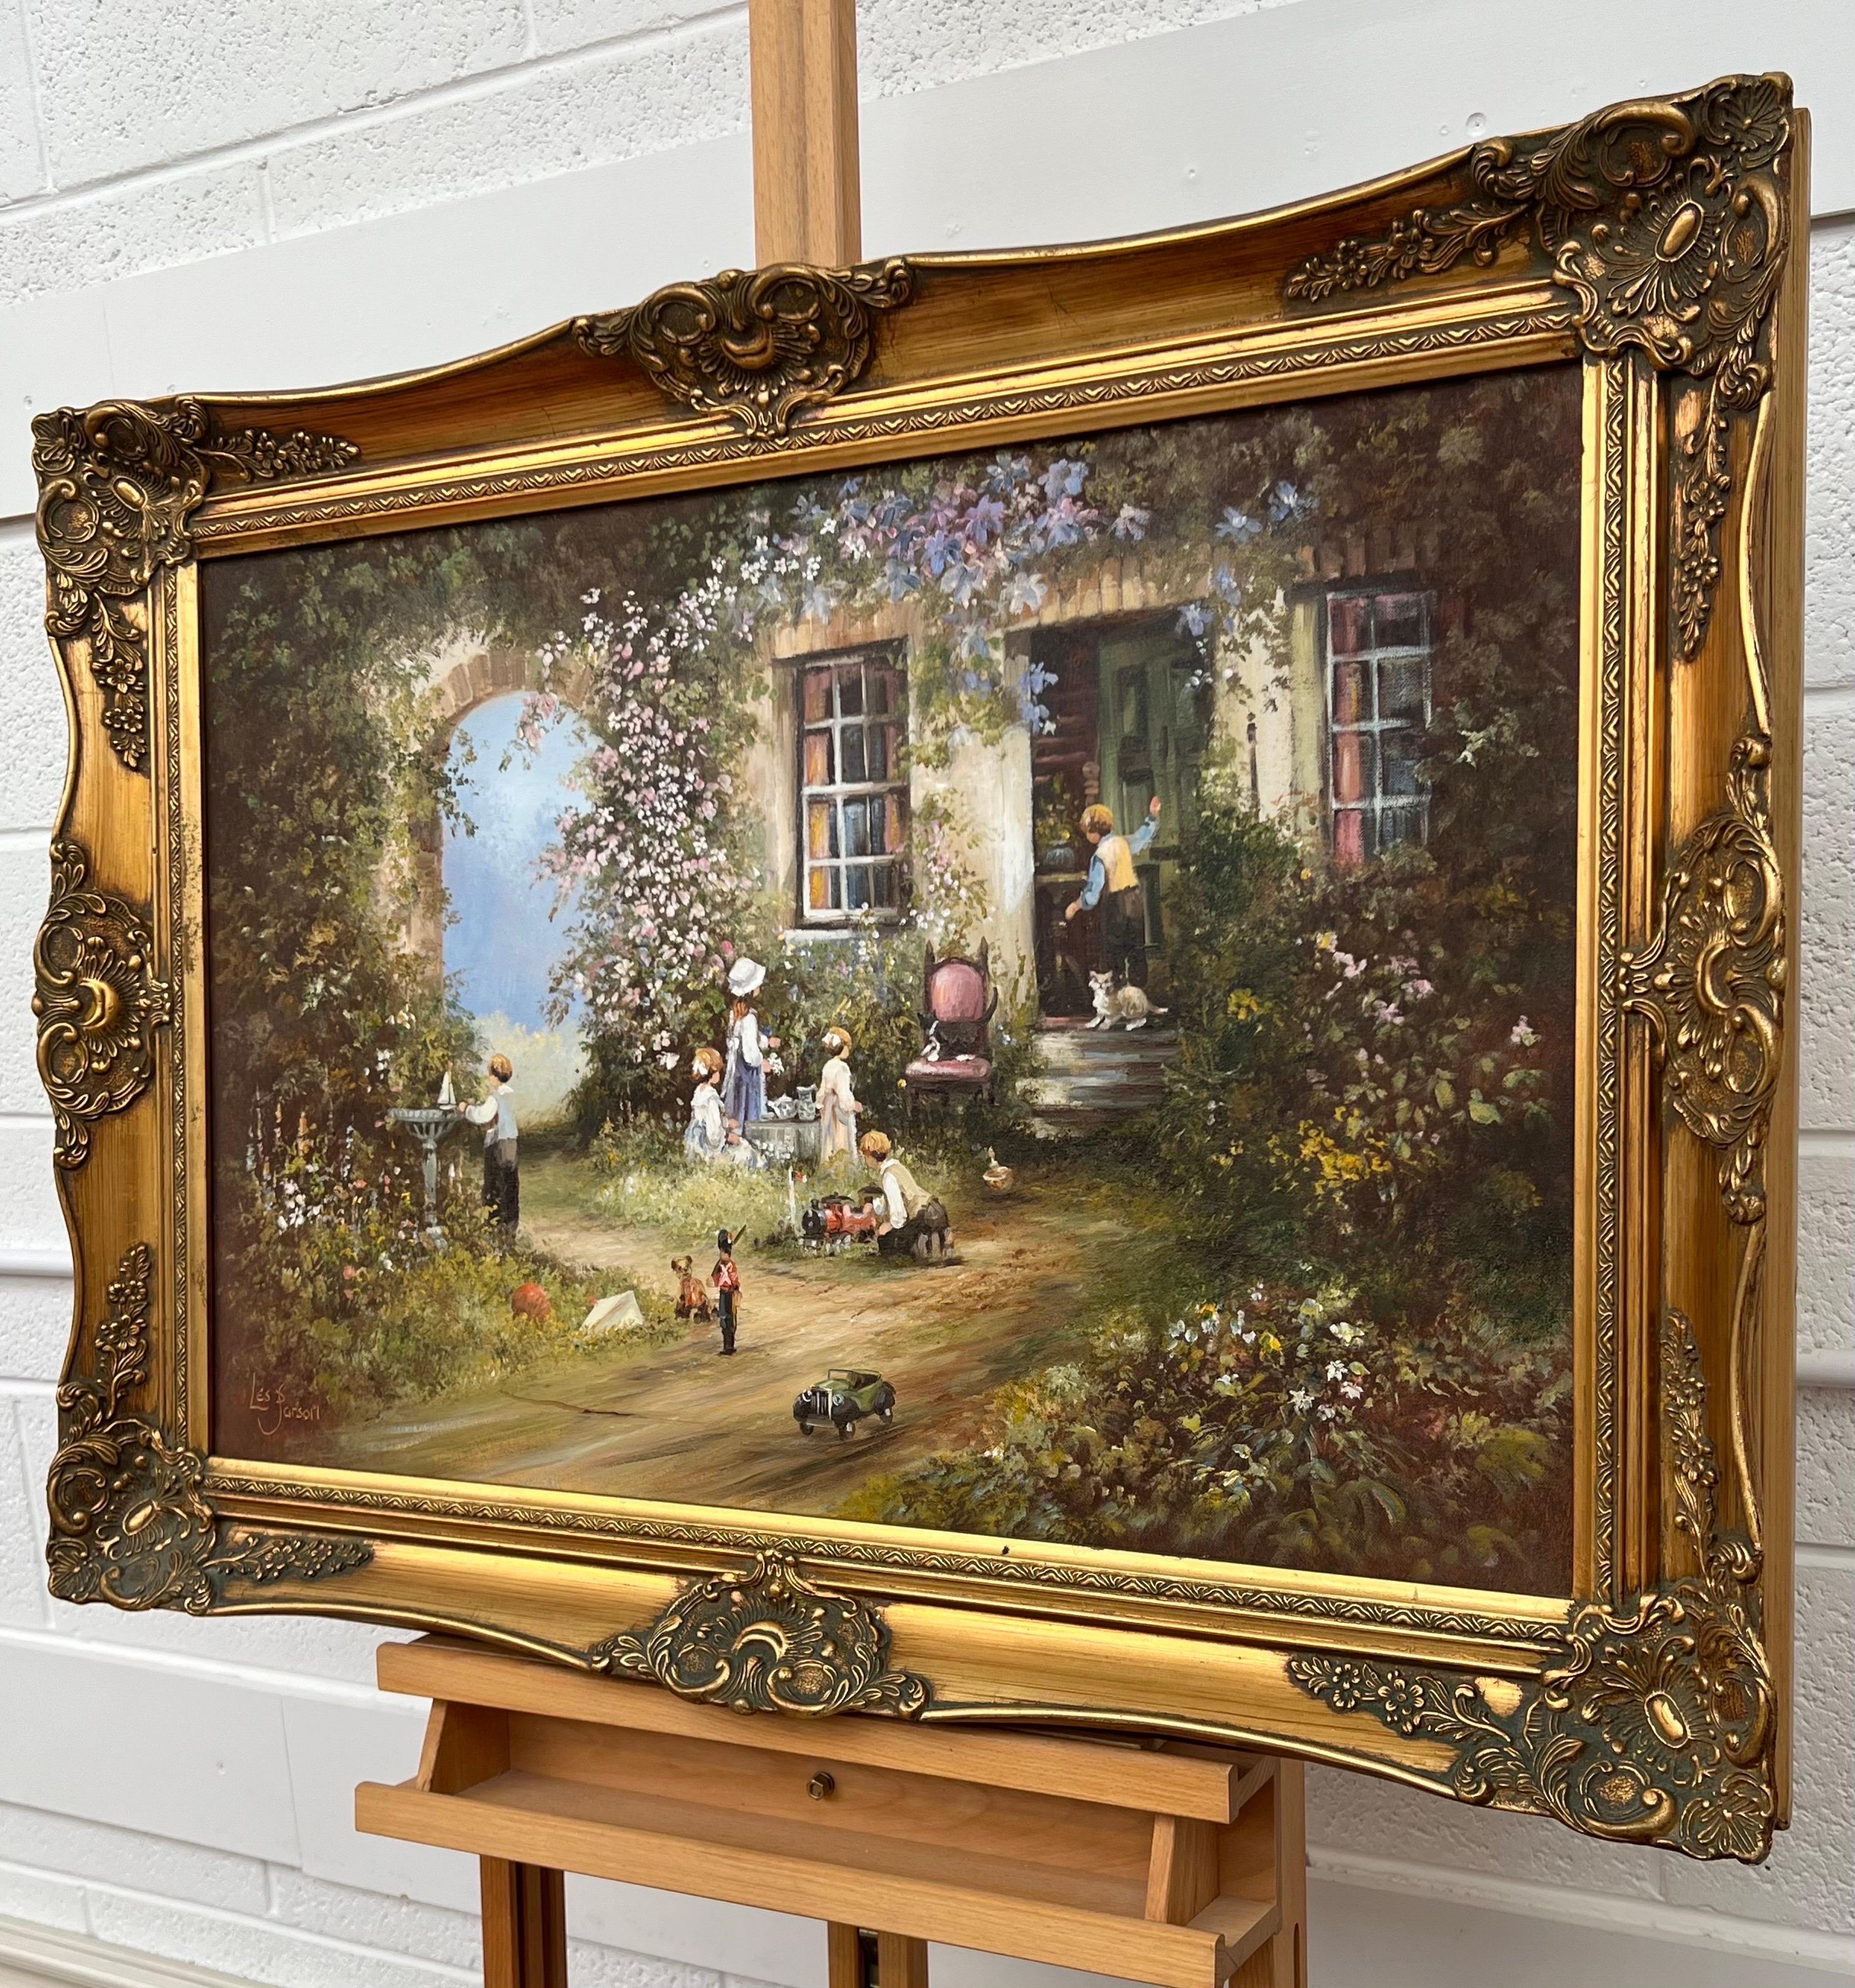 Children Playing in a Farmhouse Flower Garden in the English Countryside by British Artist, Les Parson

Art measures 30 x 20 inches
Frame measures 36 x 26 inches

This image depicts a picturesque and idyllic garden scene with several children